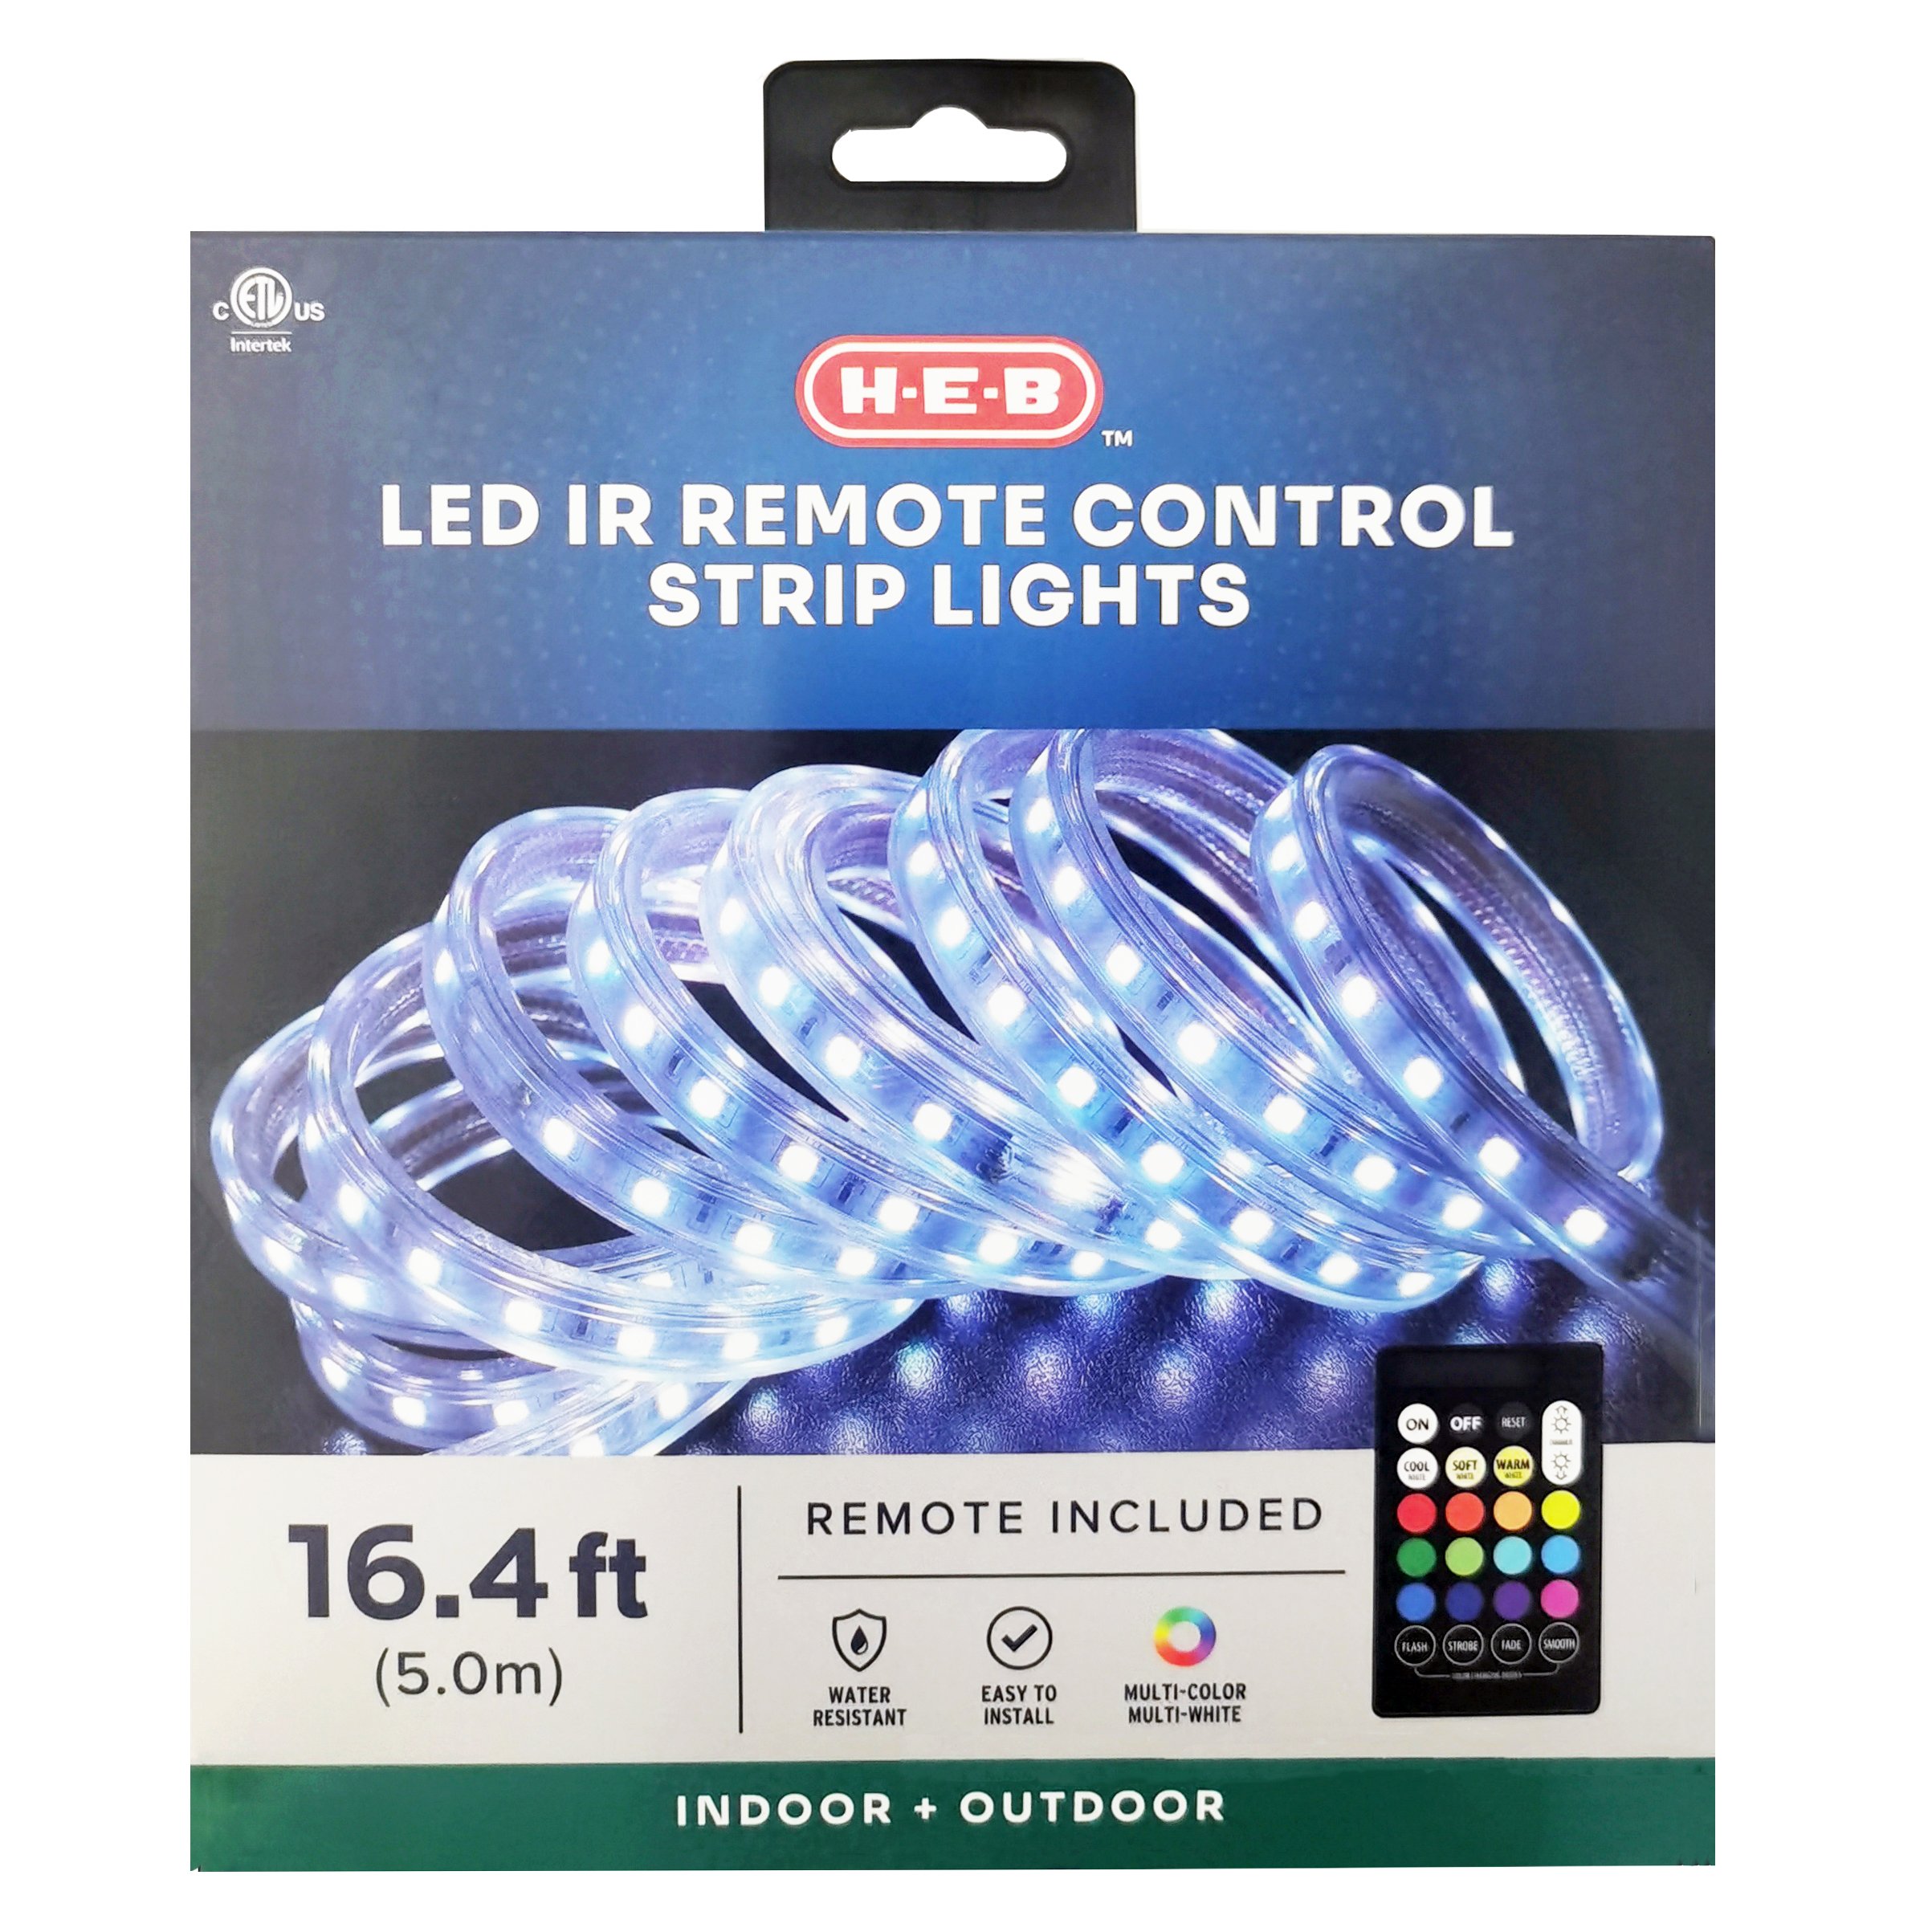 Remote-Controlled LED Strip Light, Hobby Lobby